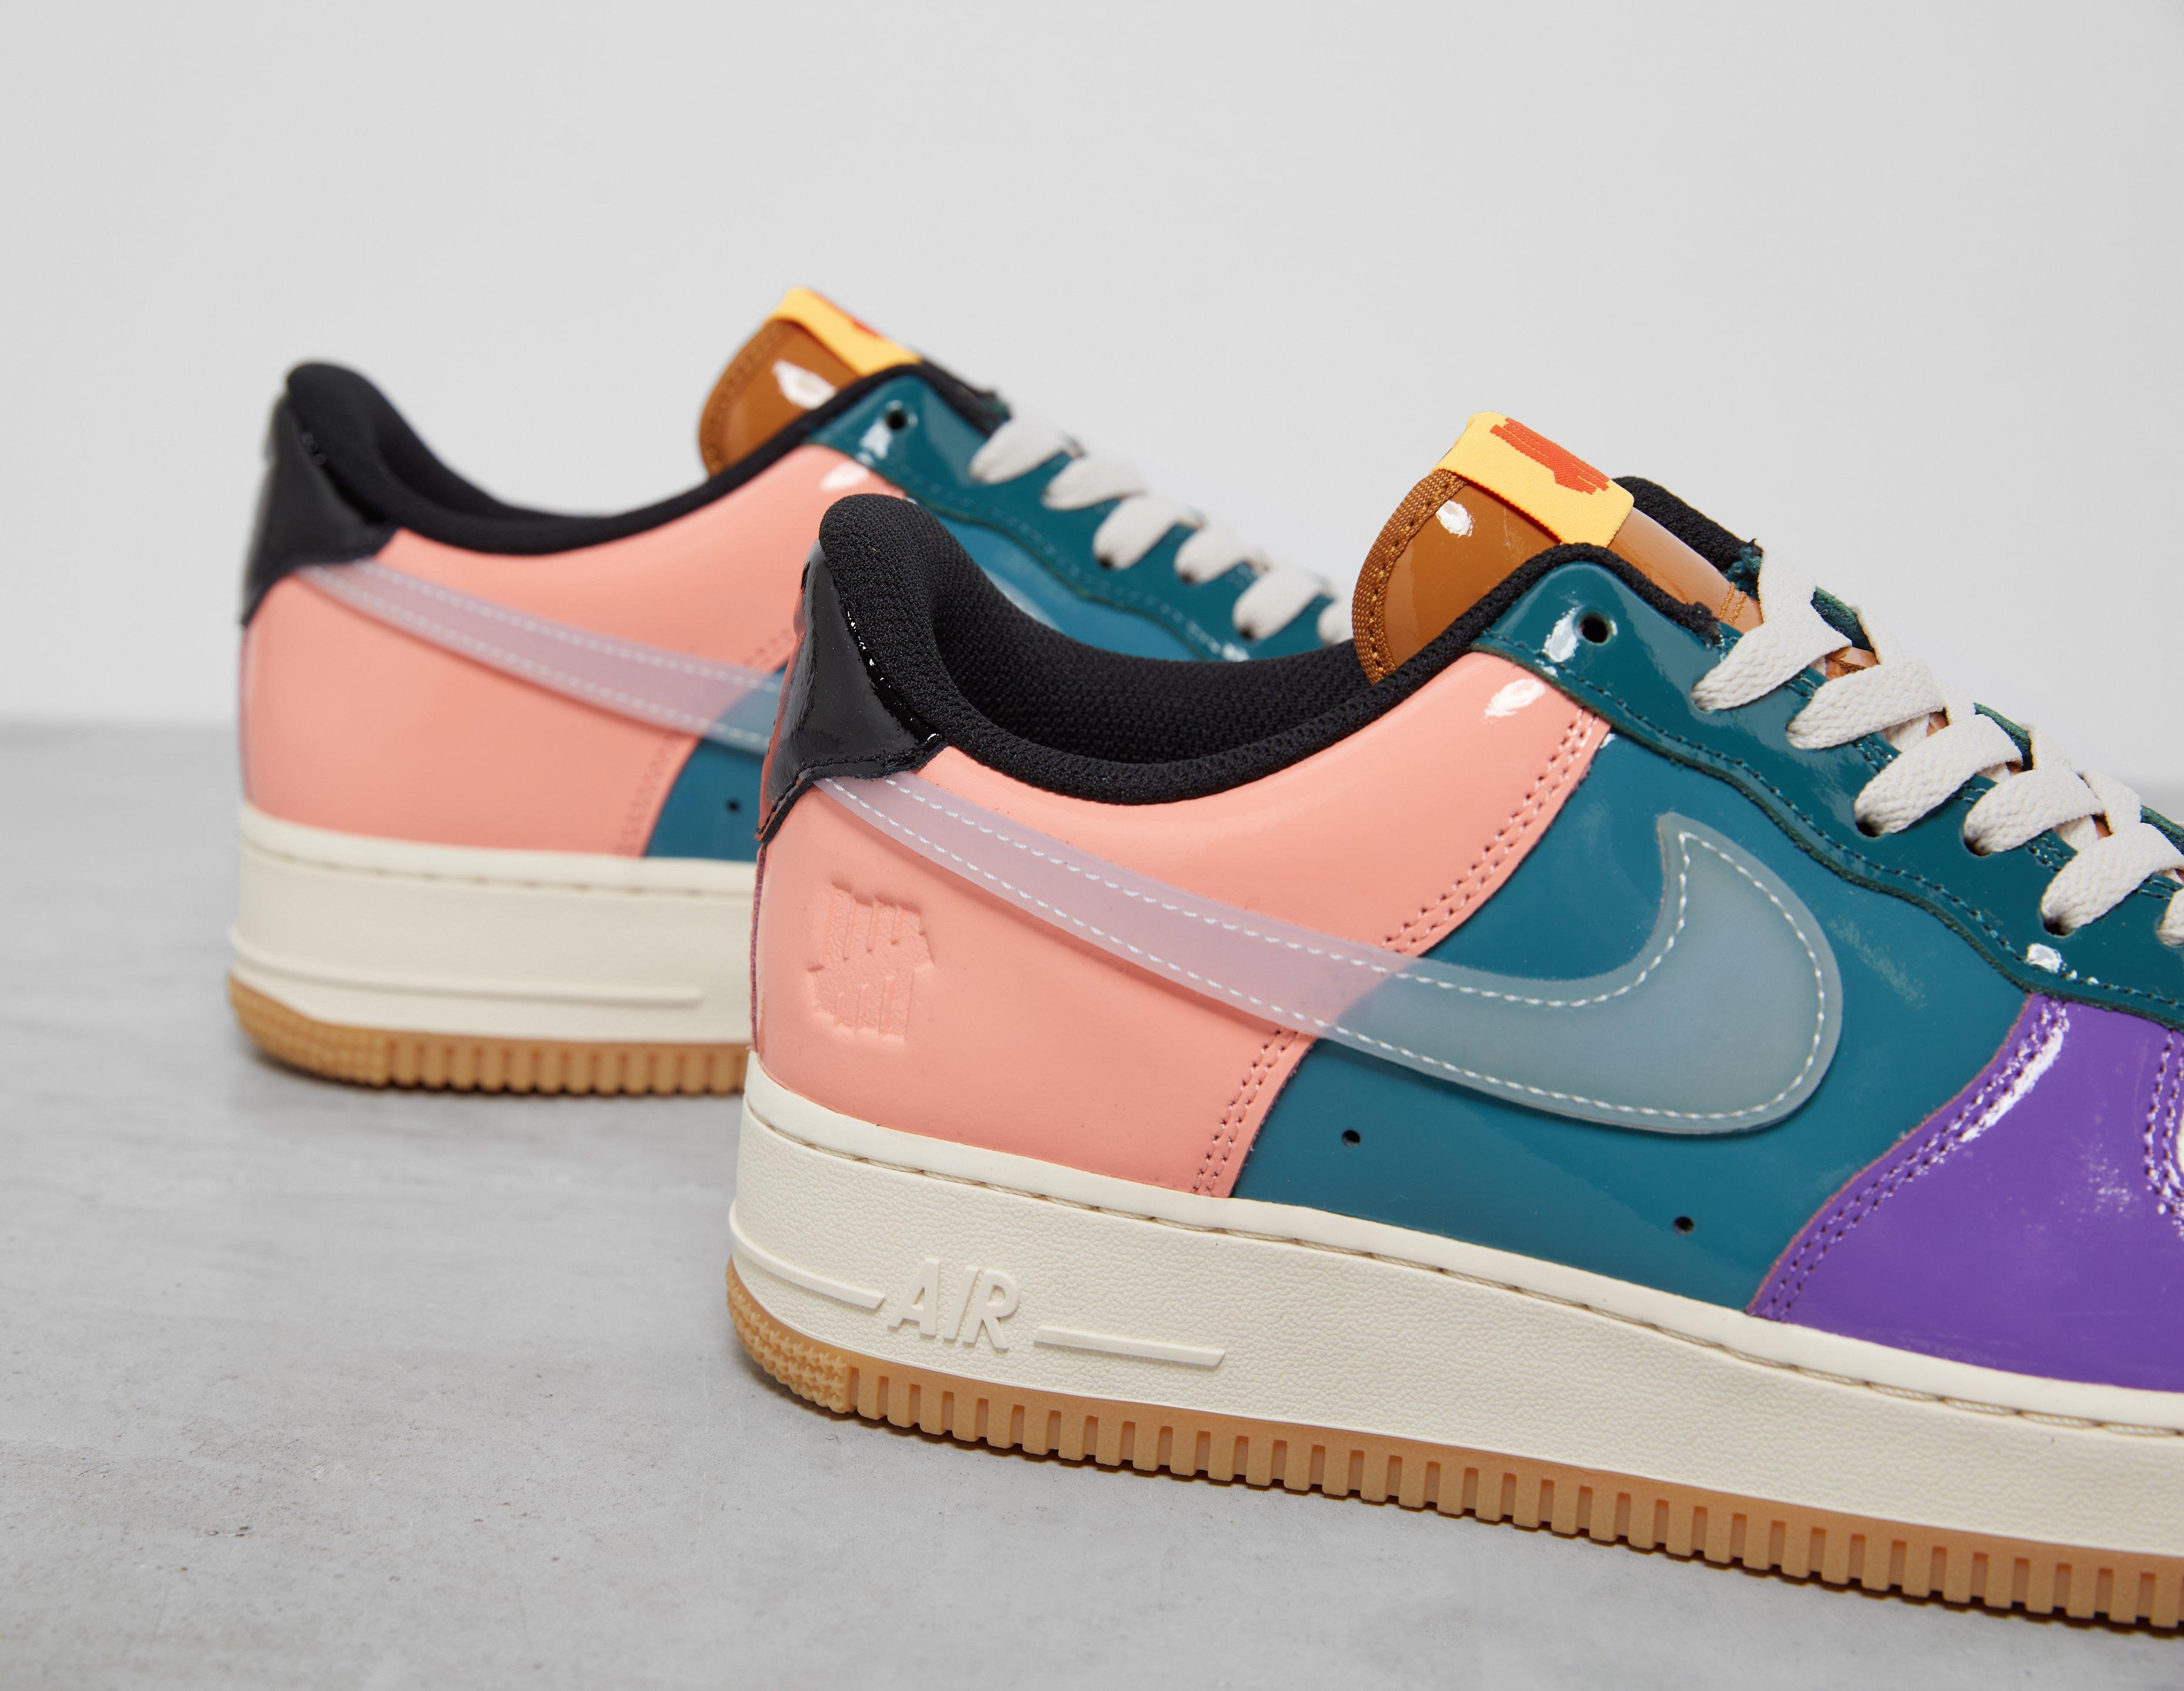 Multi Nike x Undefeated Air Force 1 Low Women's